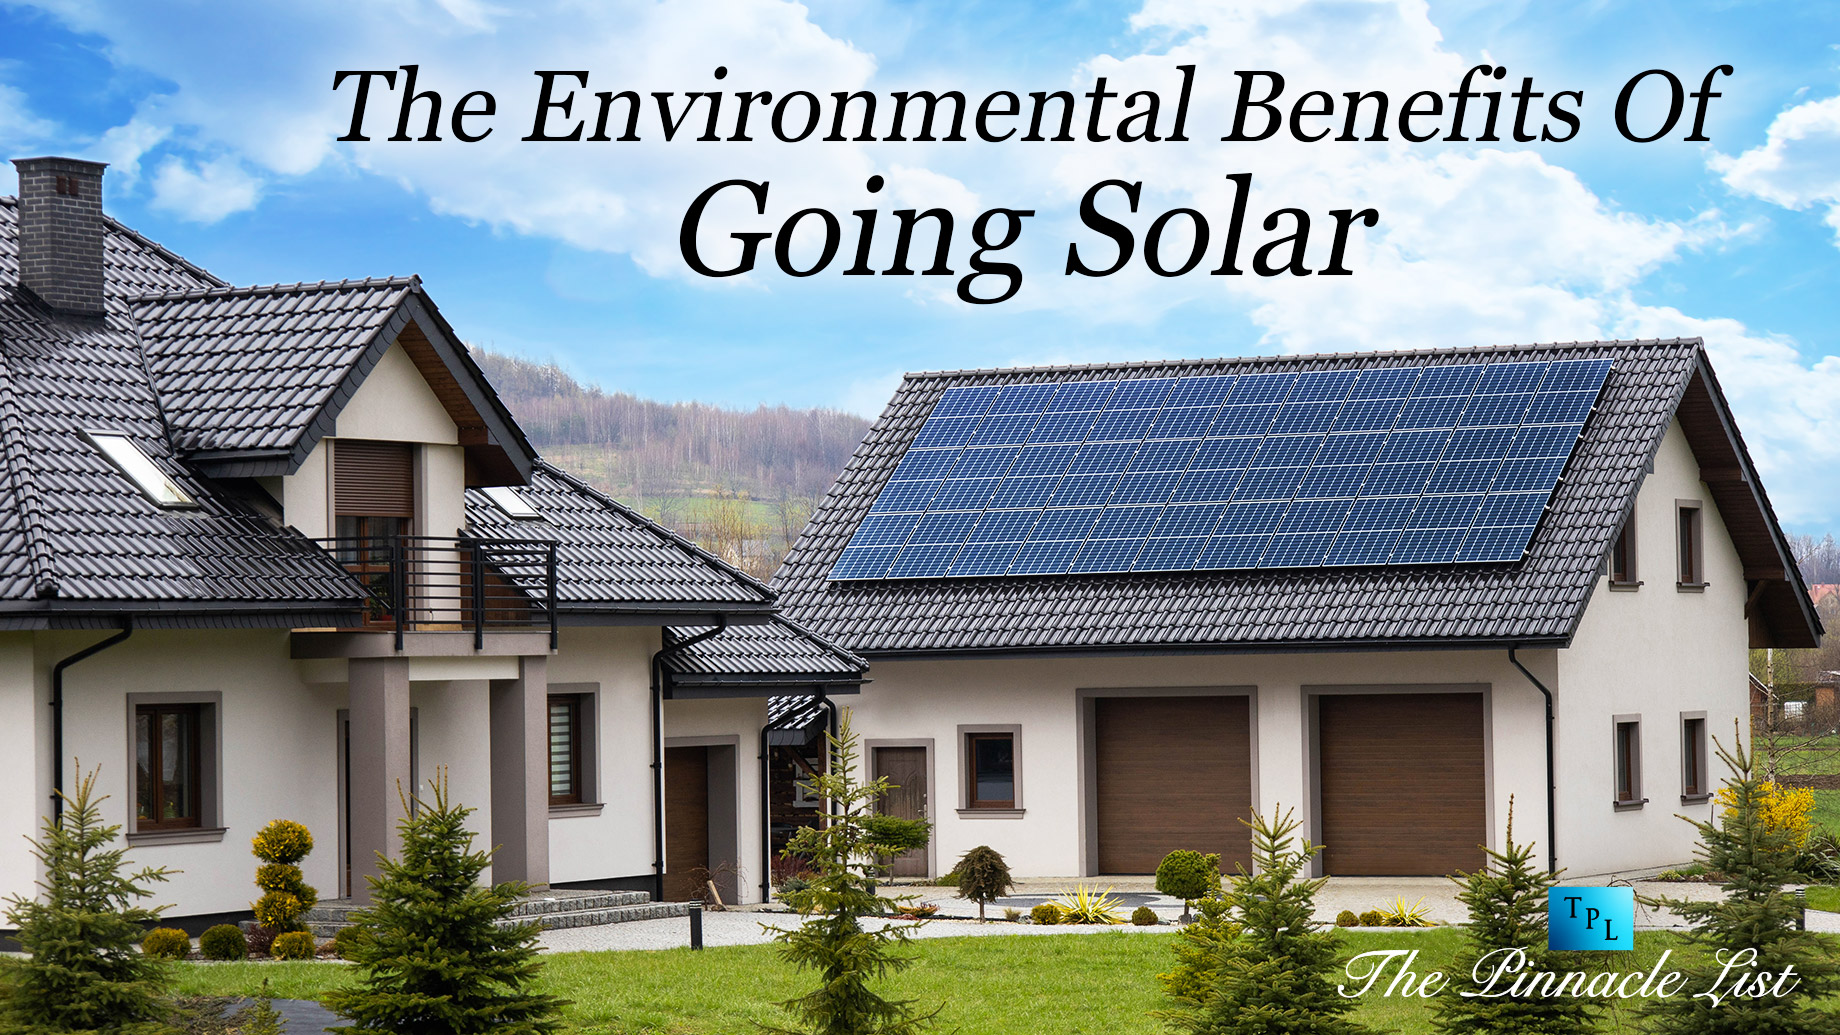 The Environmental Benefits Of Going Solar